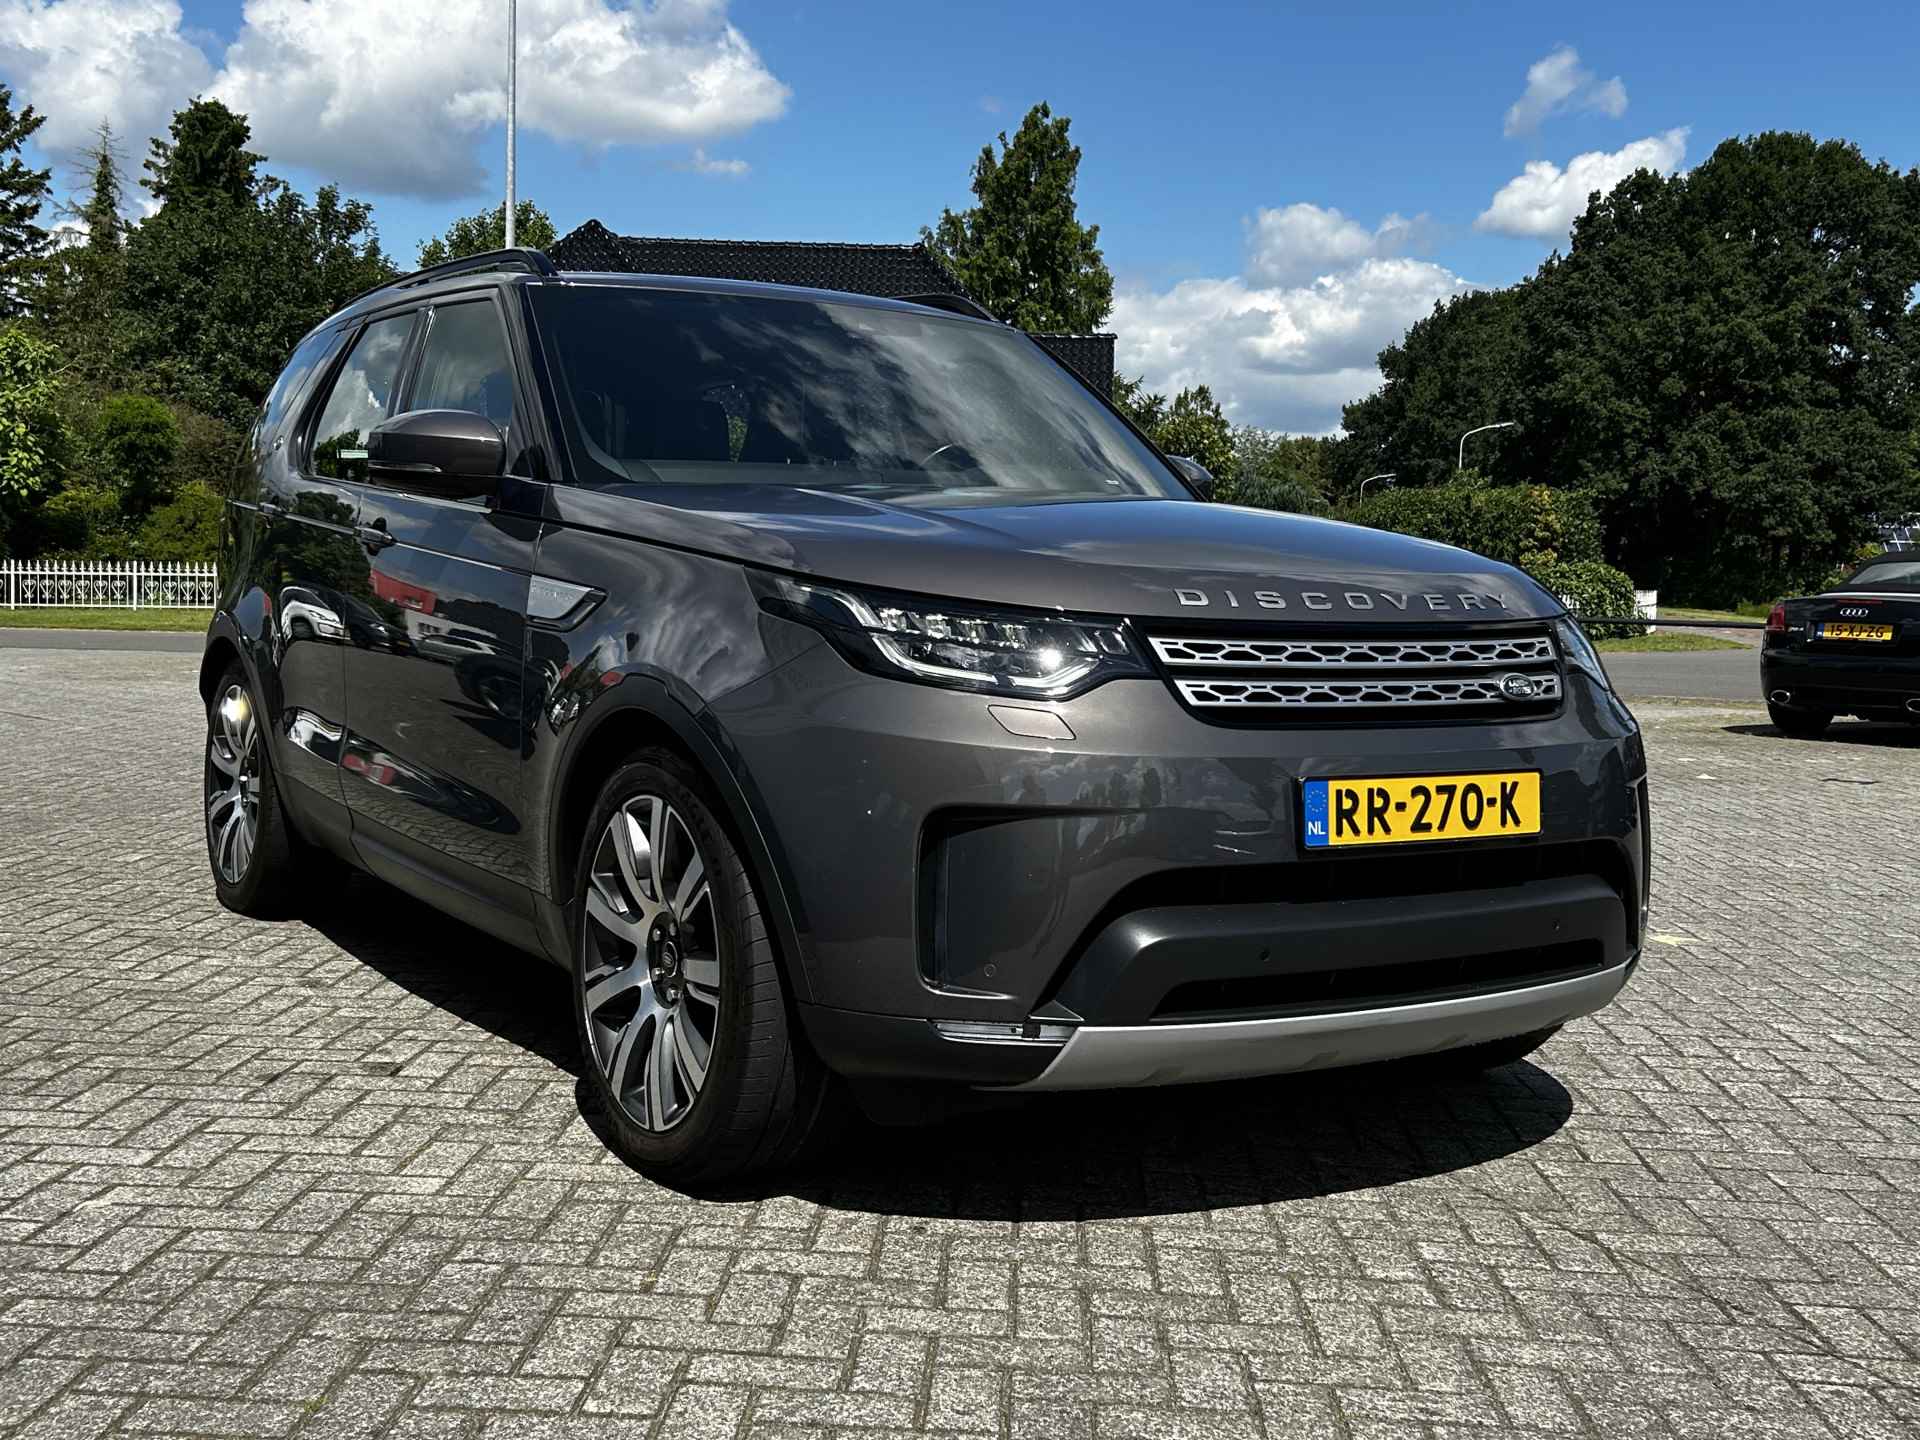 Land Rover Discovery 2.0 Sd4 HSE Luxury 7p. Navi/Clima/Leder/Panodak/7-Persoons/Luchtvering/Trekhaak - 5/48